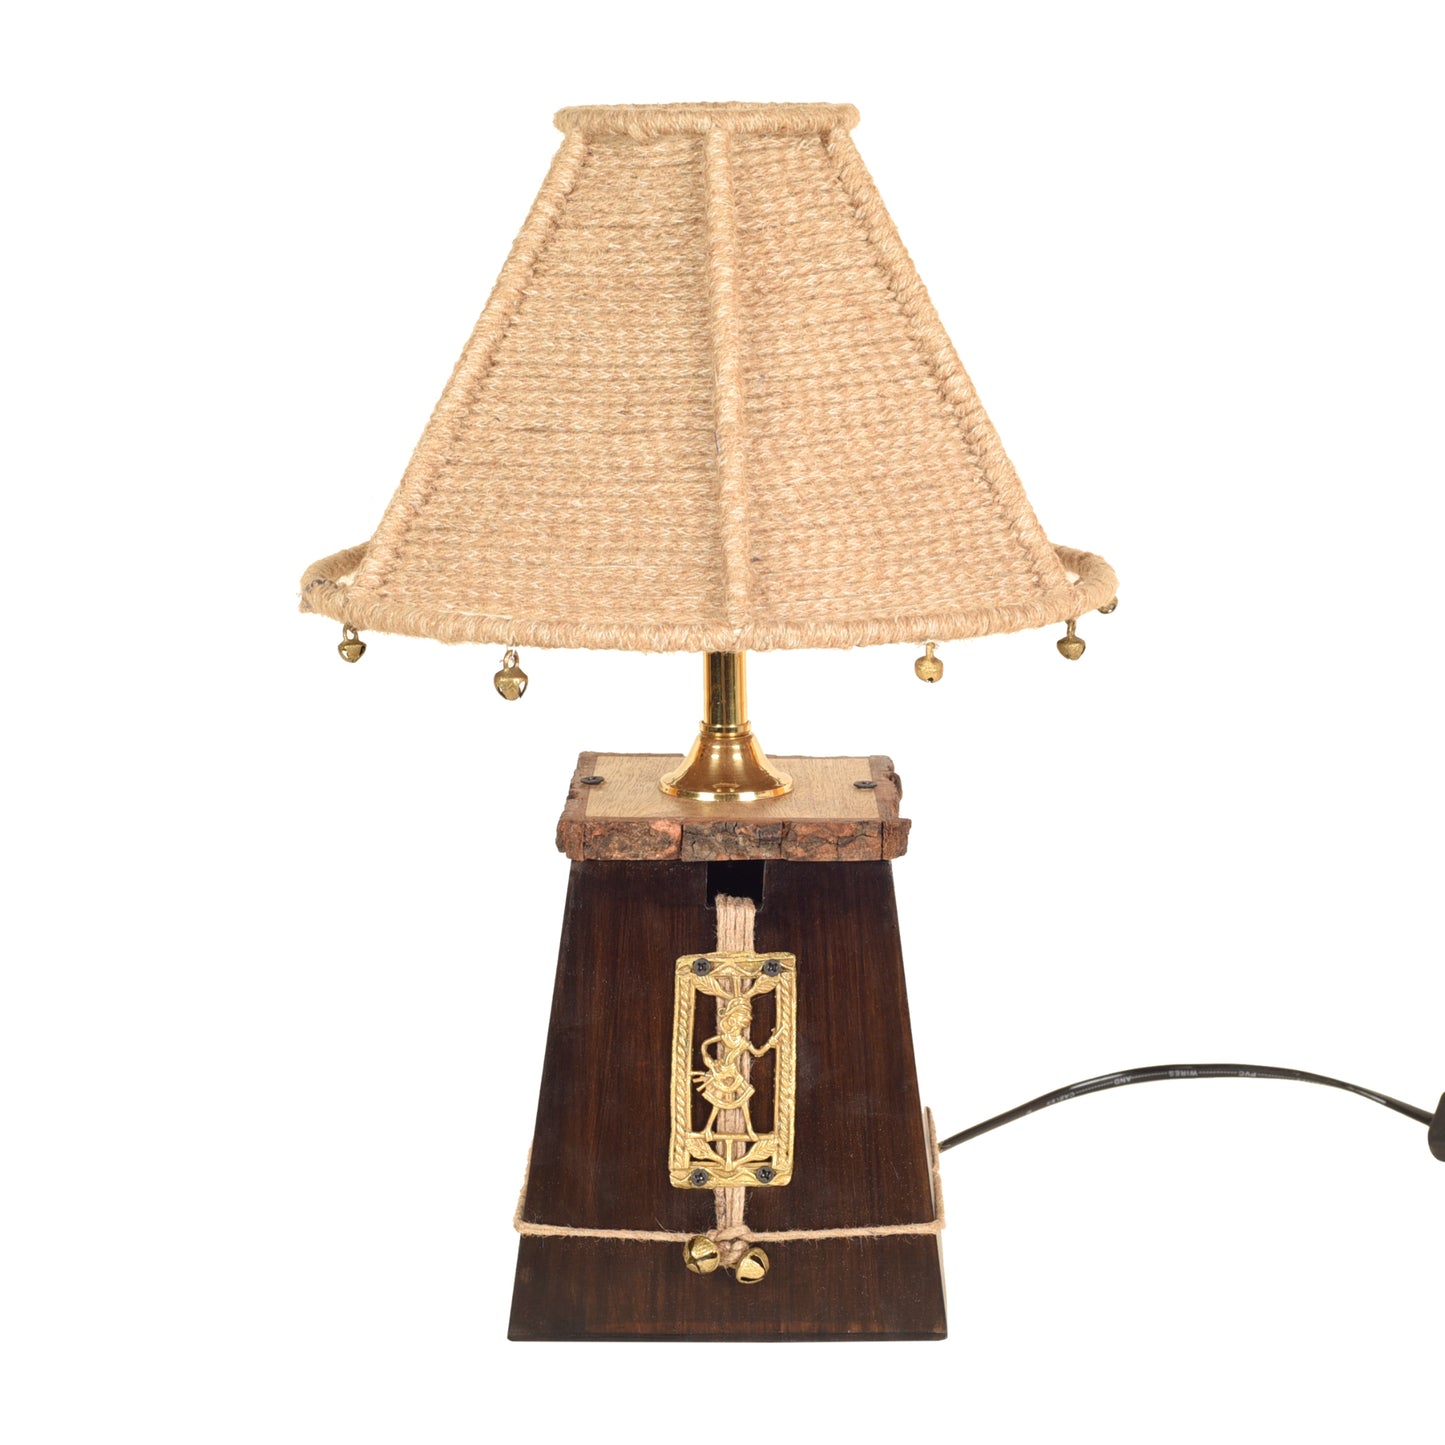 Handcrafted Dhokra Art Teak Wood Table Lamp with Jute Shade (5.5 x 5 in)